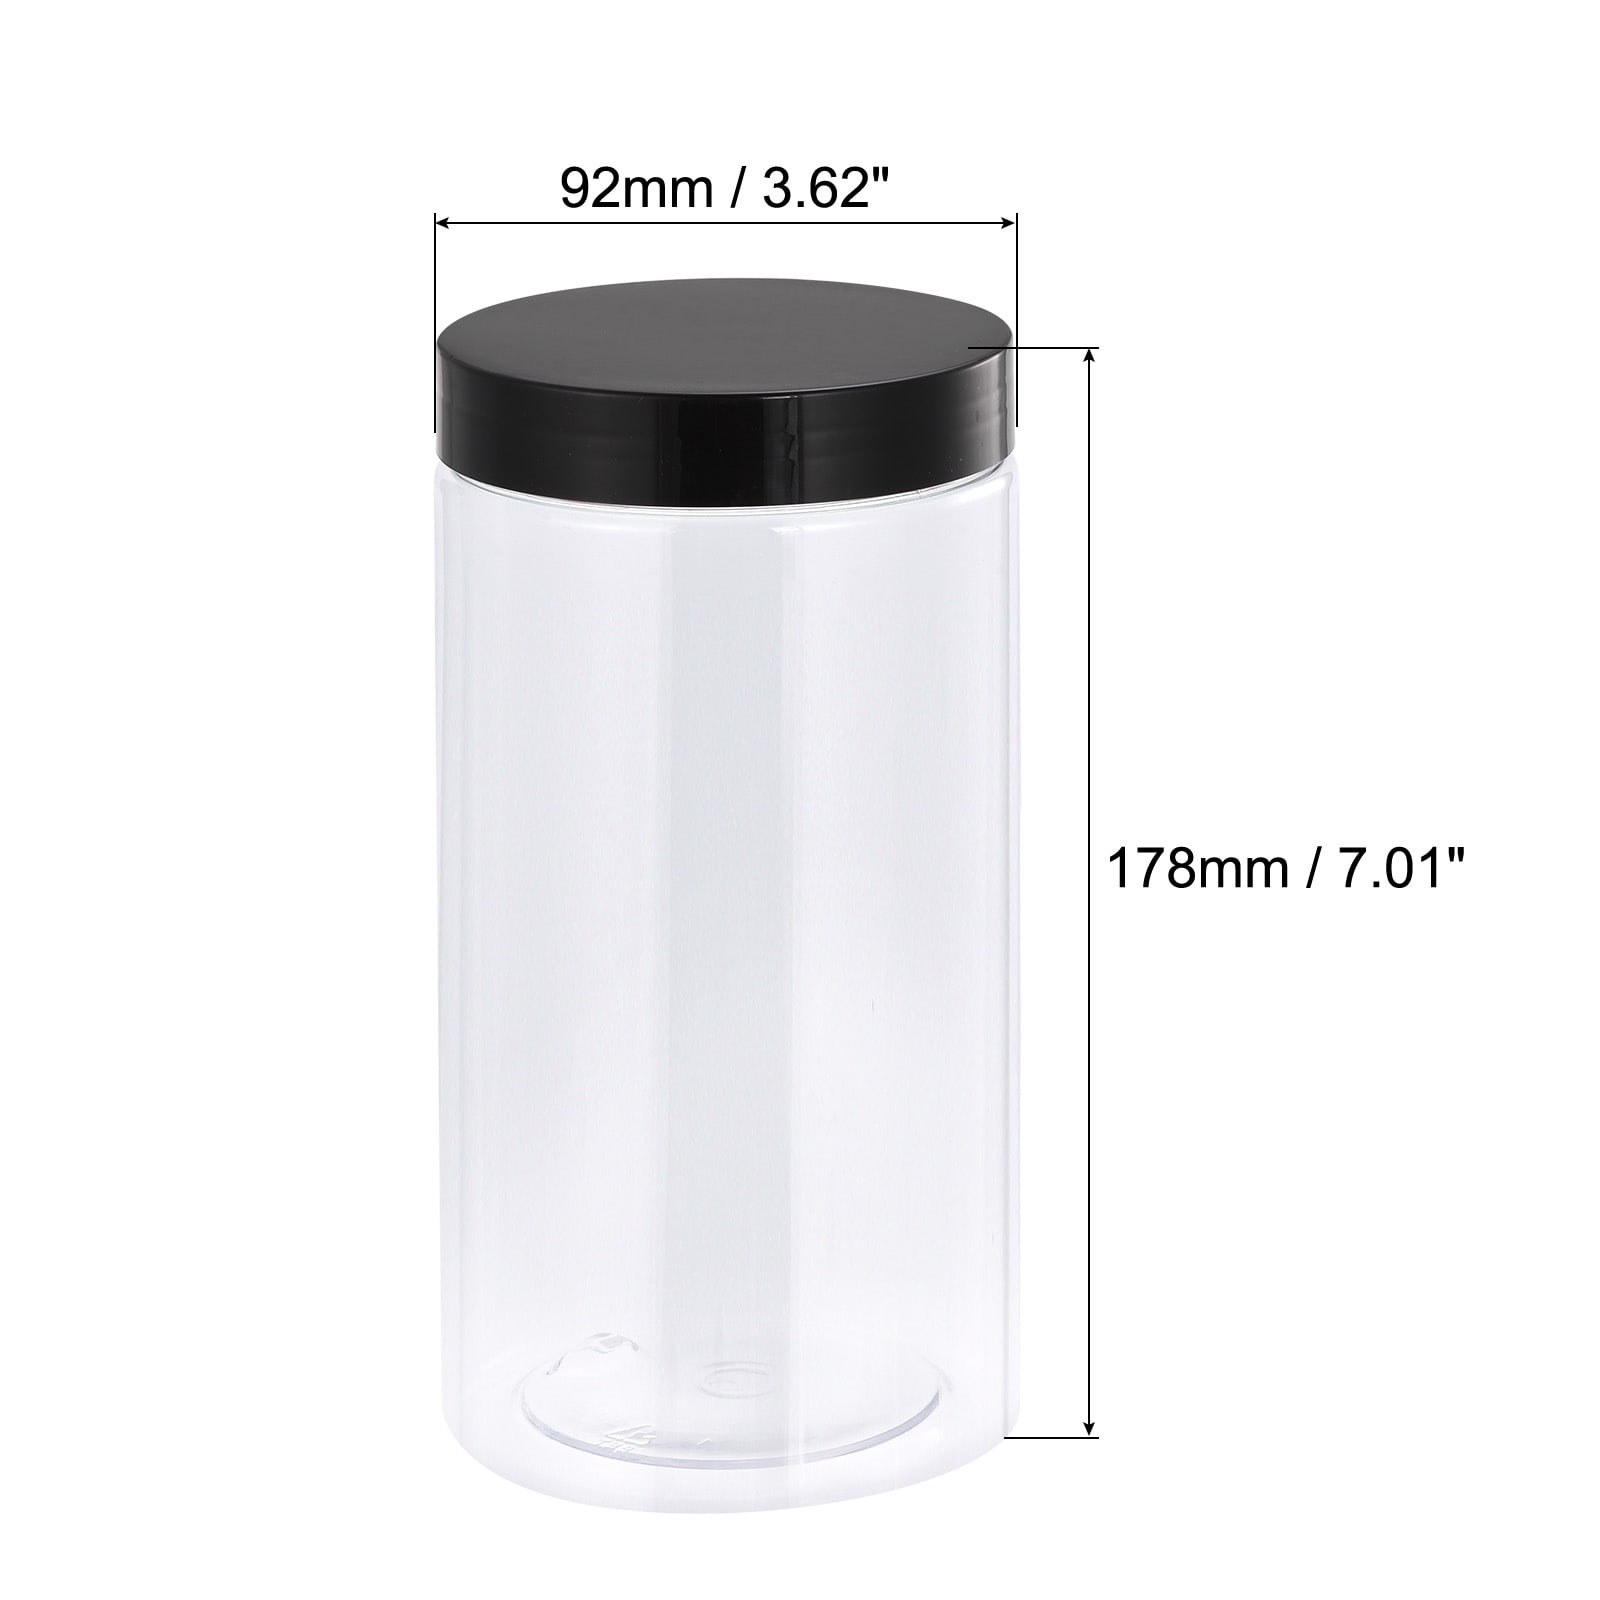 https://ak1.ostkcdn.com/images/products/is/images/direct/9ff8fca980cf5726a2169625e4651478f4553d83/Round-Plastic-Jars-with-Black-Screw-Top-Lid%2C-2Pcs.jpg